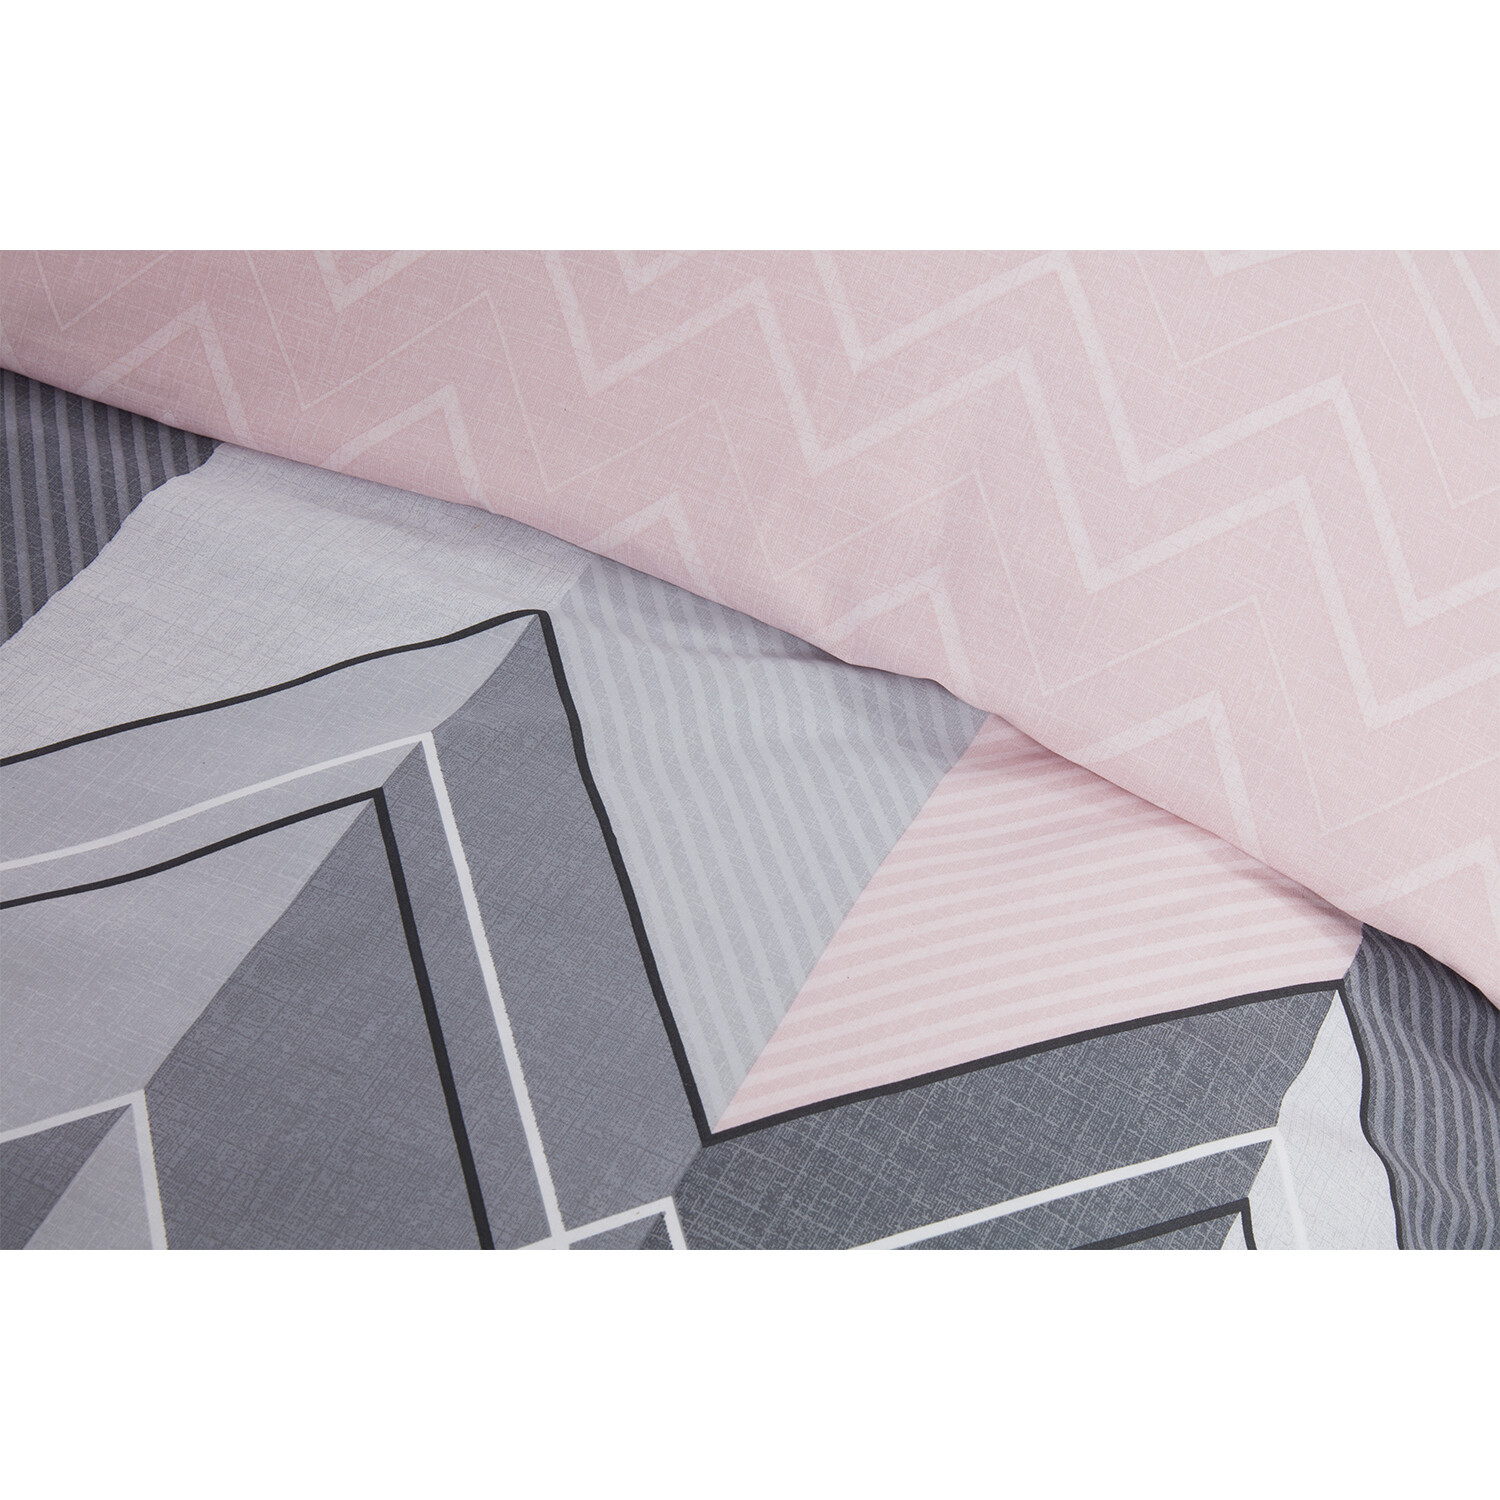 My Home King Pink Chevron Duvet Cover and Pillowcase Image 4